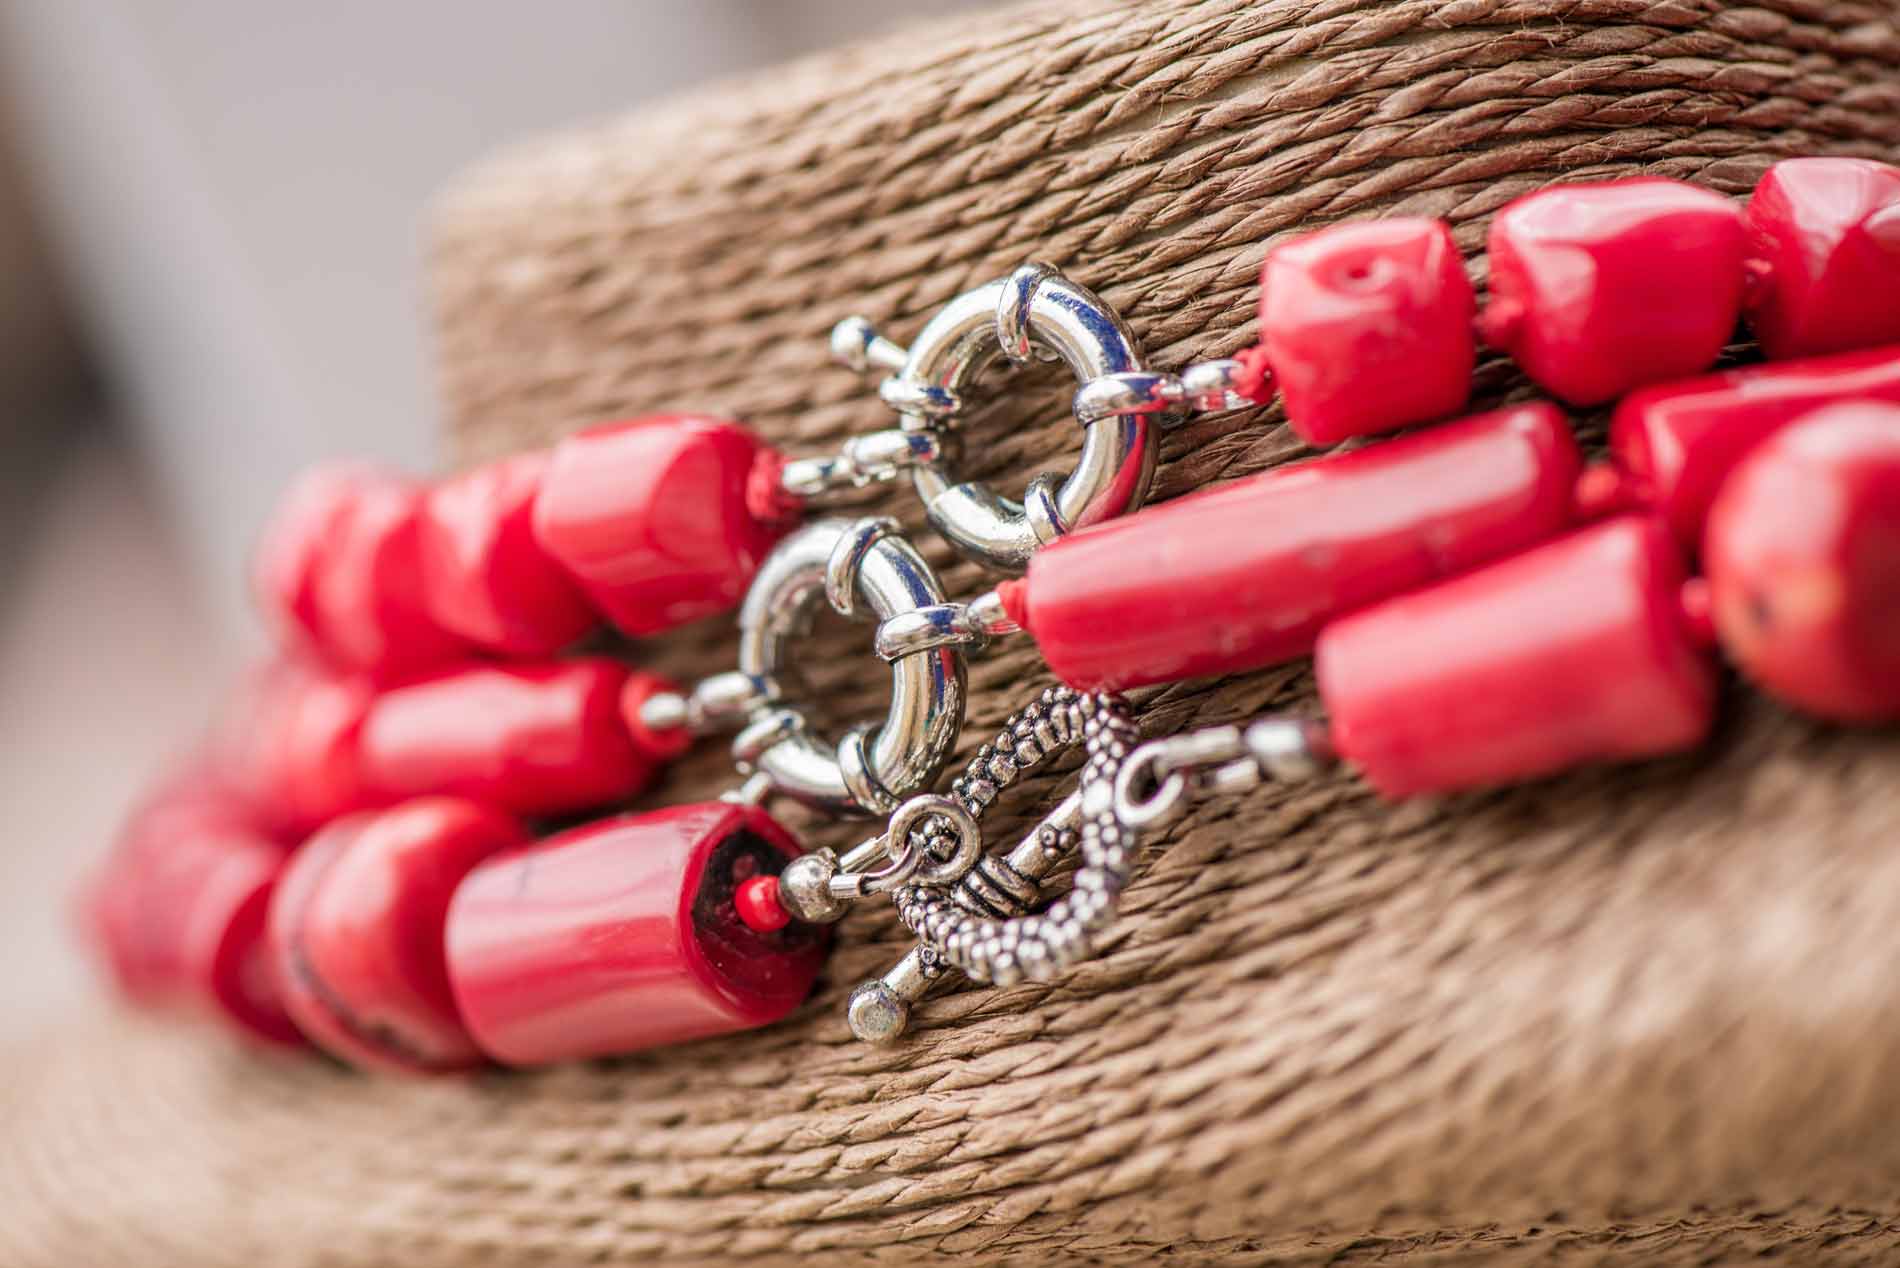 Here's how to easily clasp a bracelet by yourself